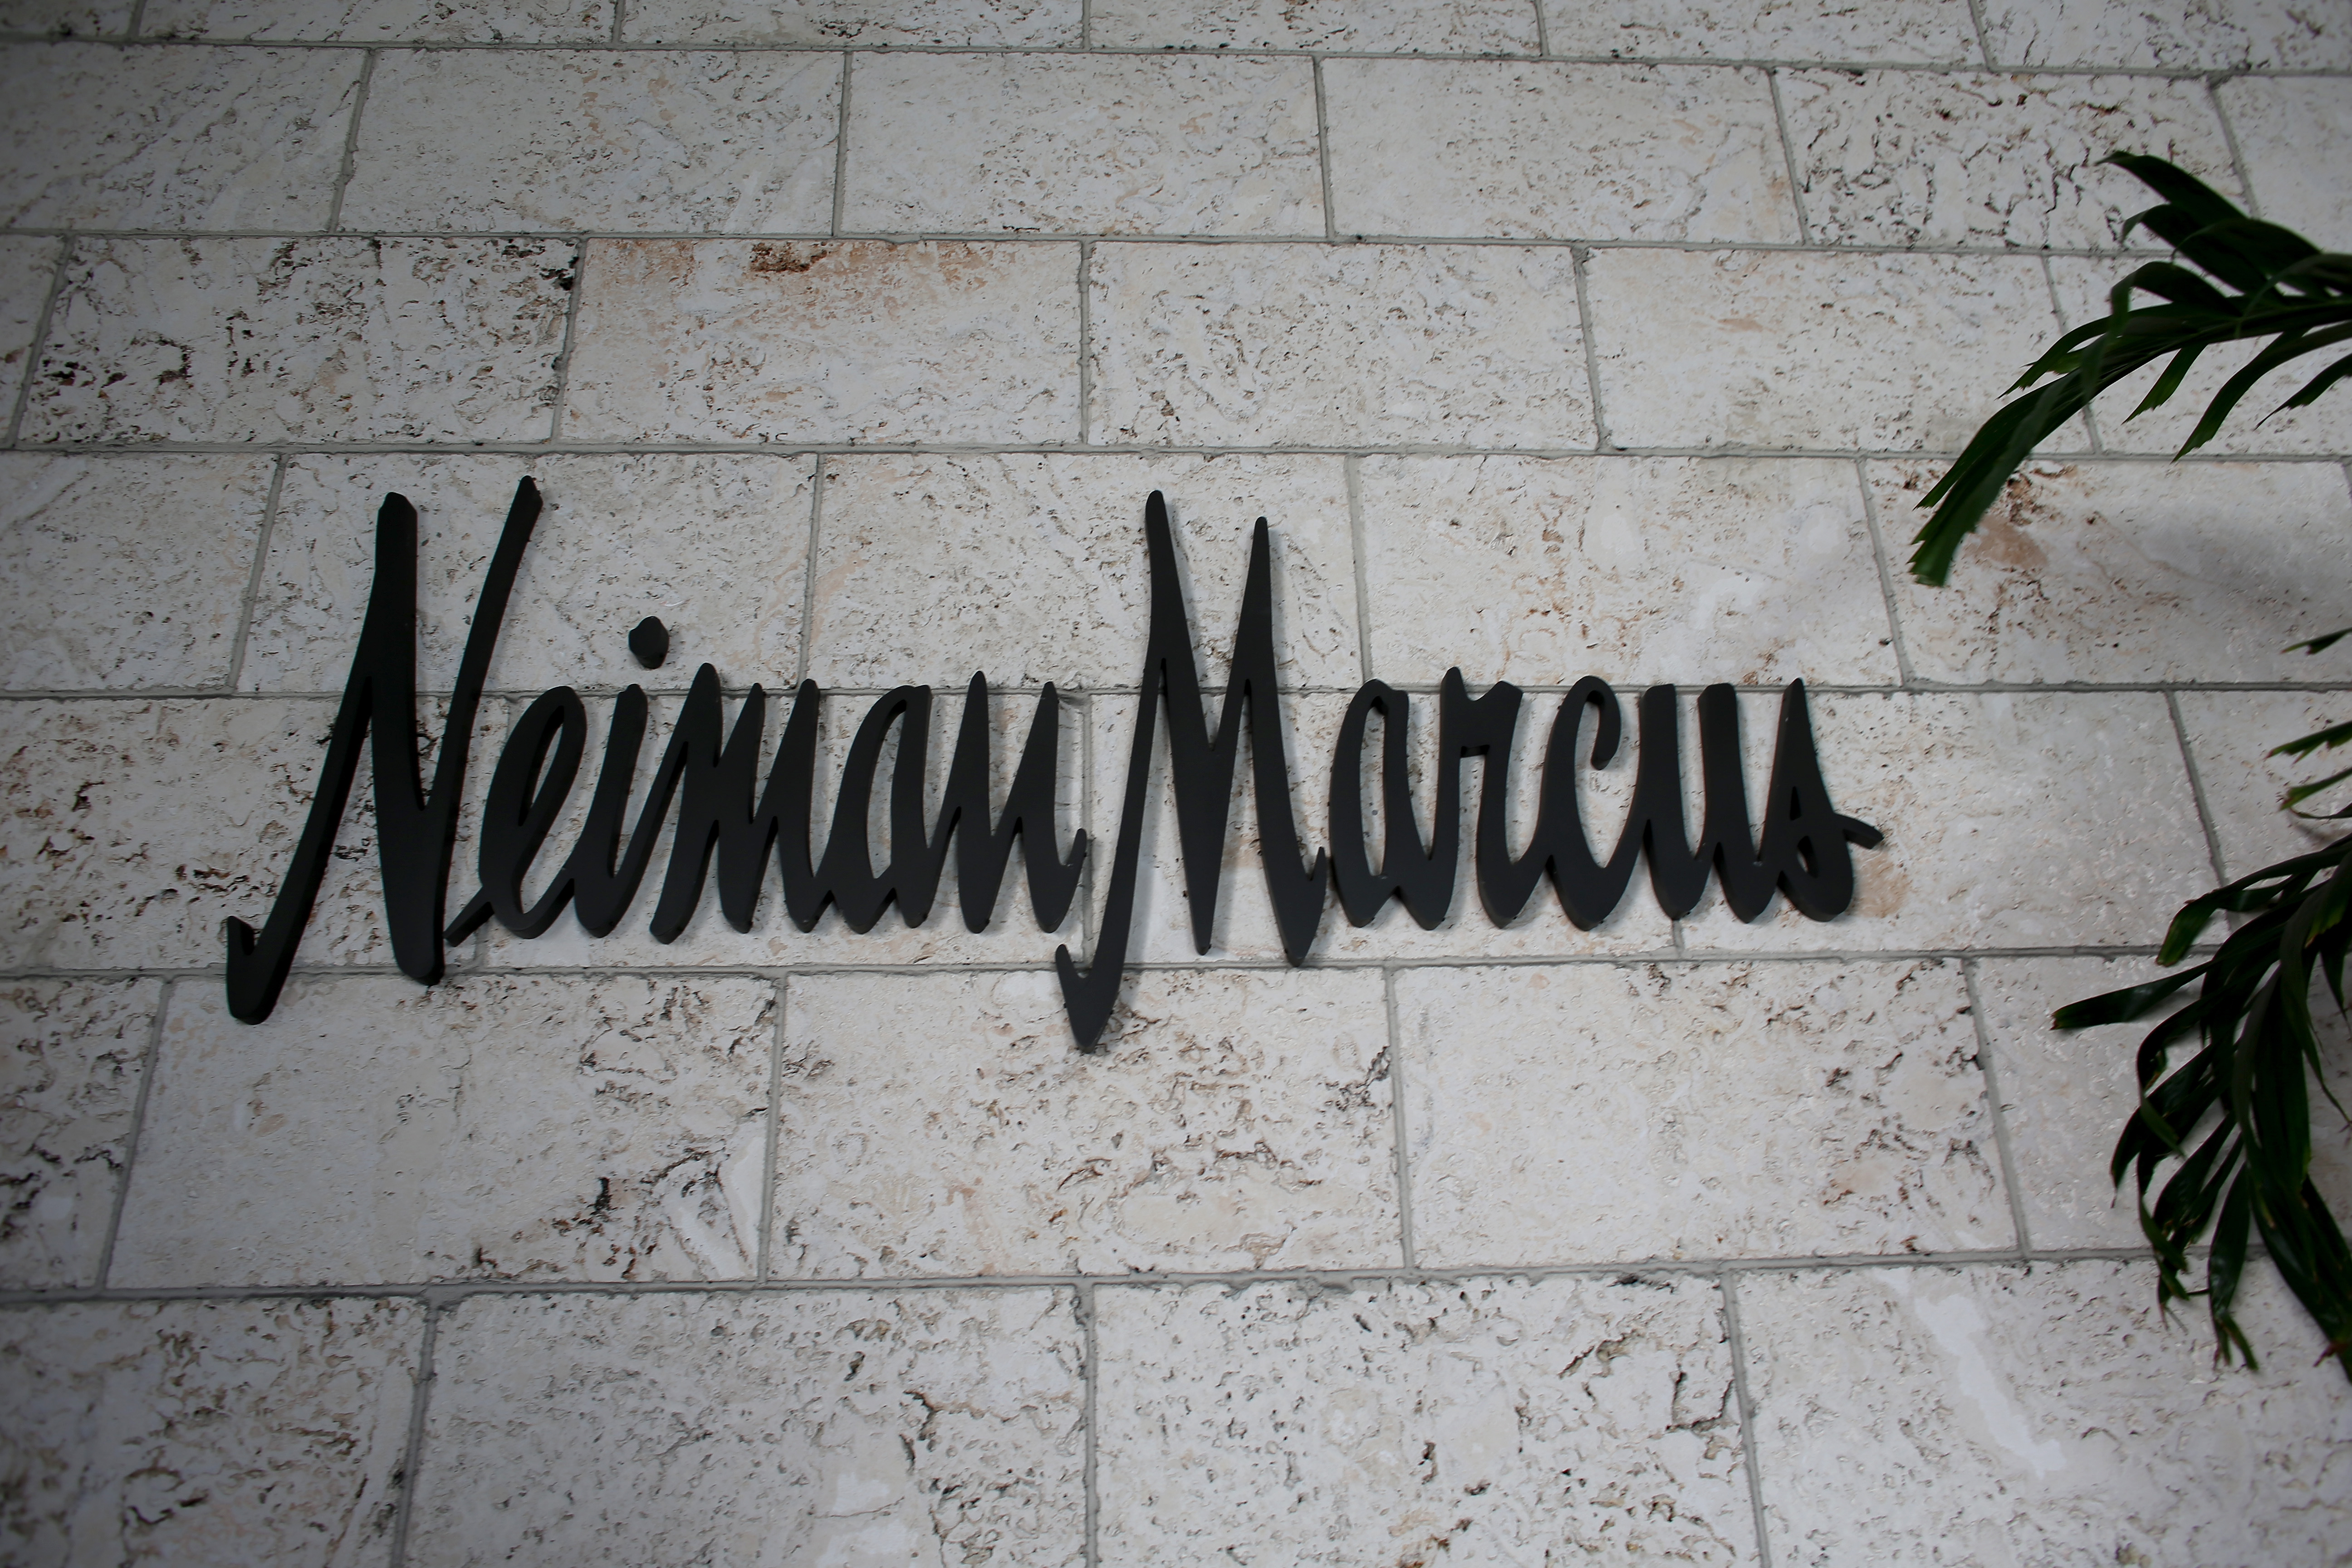 Luxury retailer Neiman Marcus files for bankruptcy protection